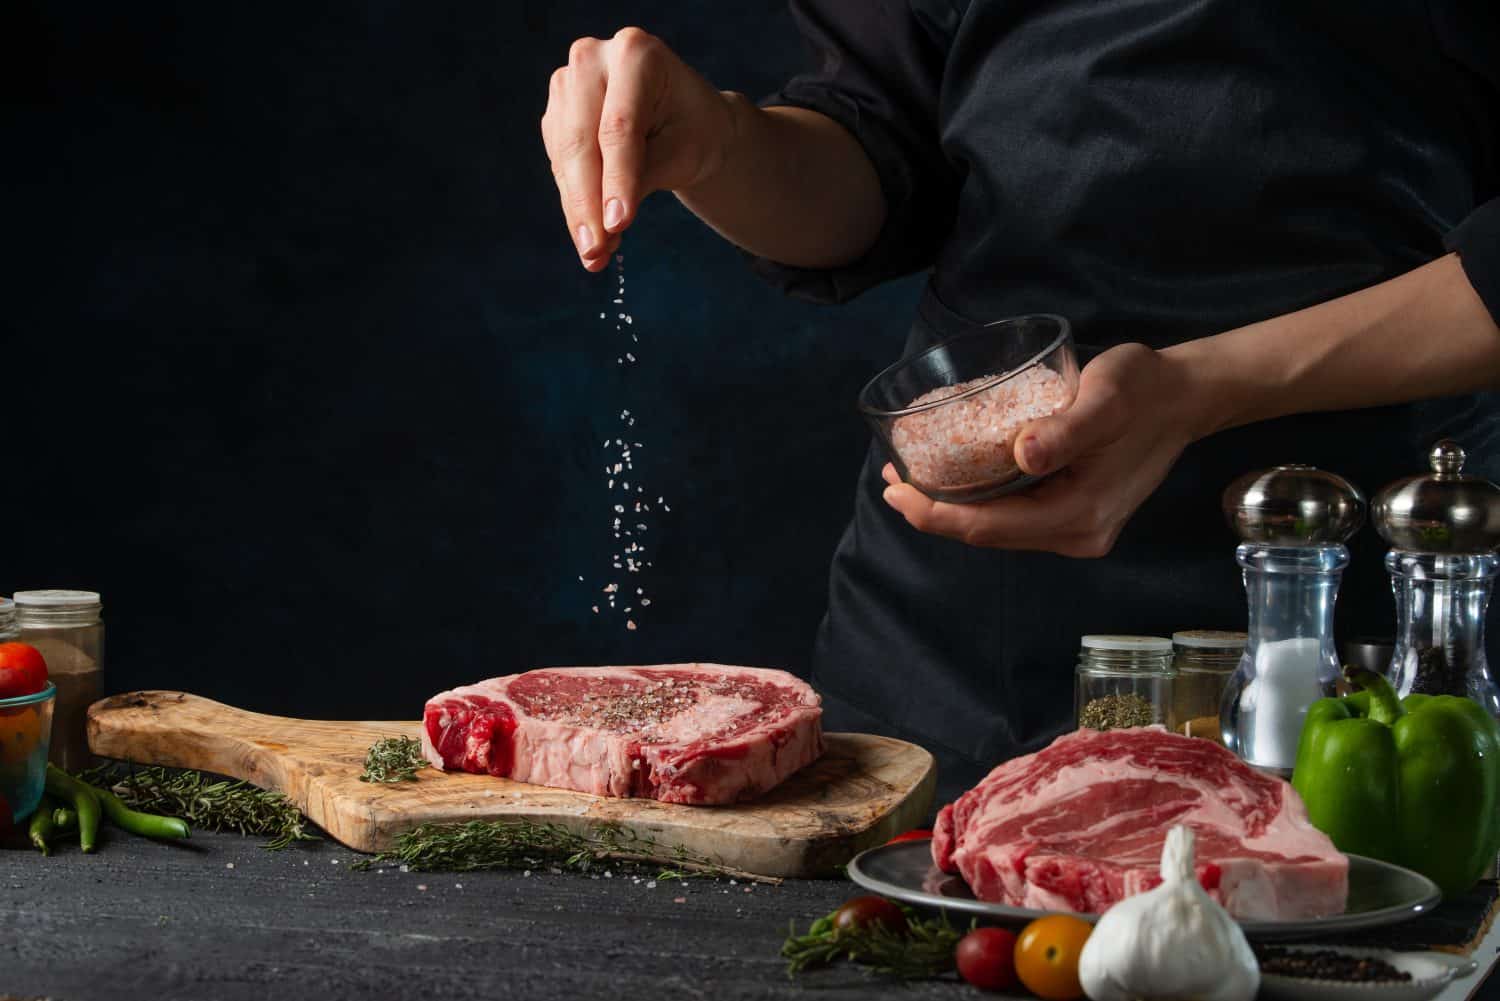 Chef pours sea salt on raw steak on wooden chopped board. Backstage of preparing grilled pork meat at restaurant kitchen on dark blue background. Frozen motion. Cooking process.